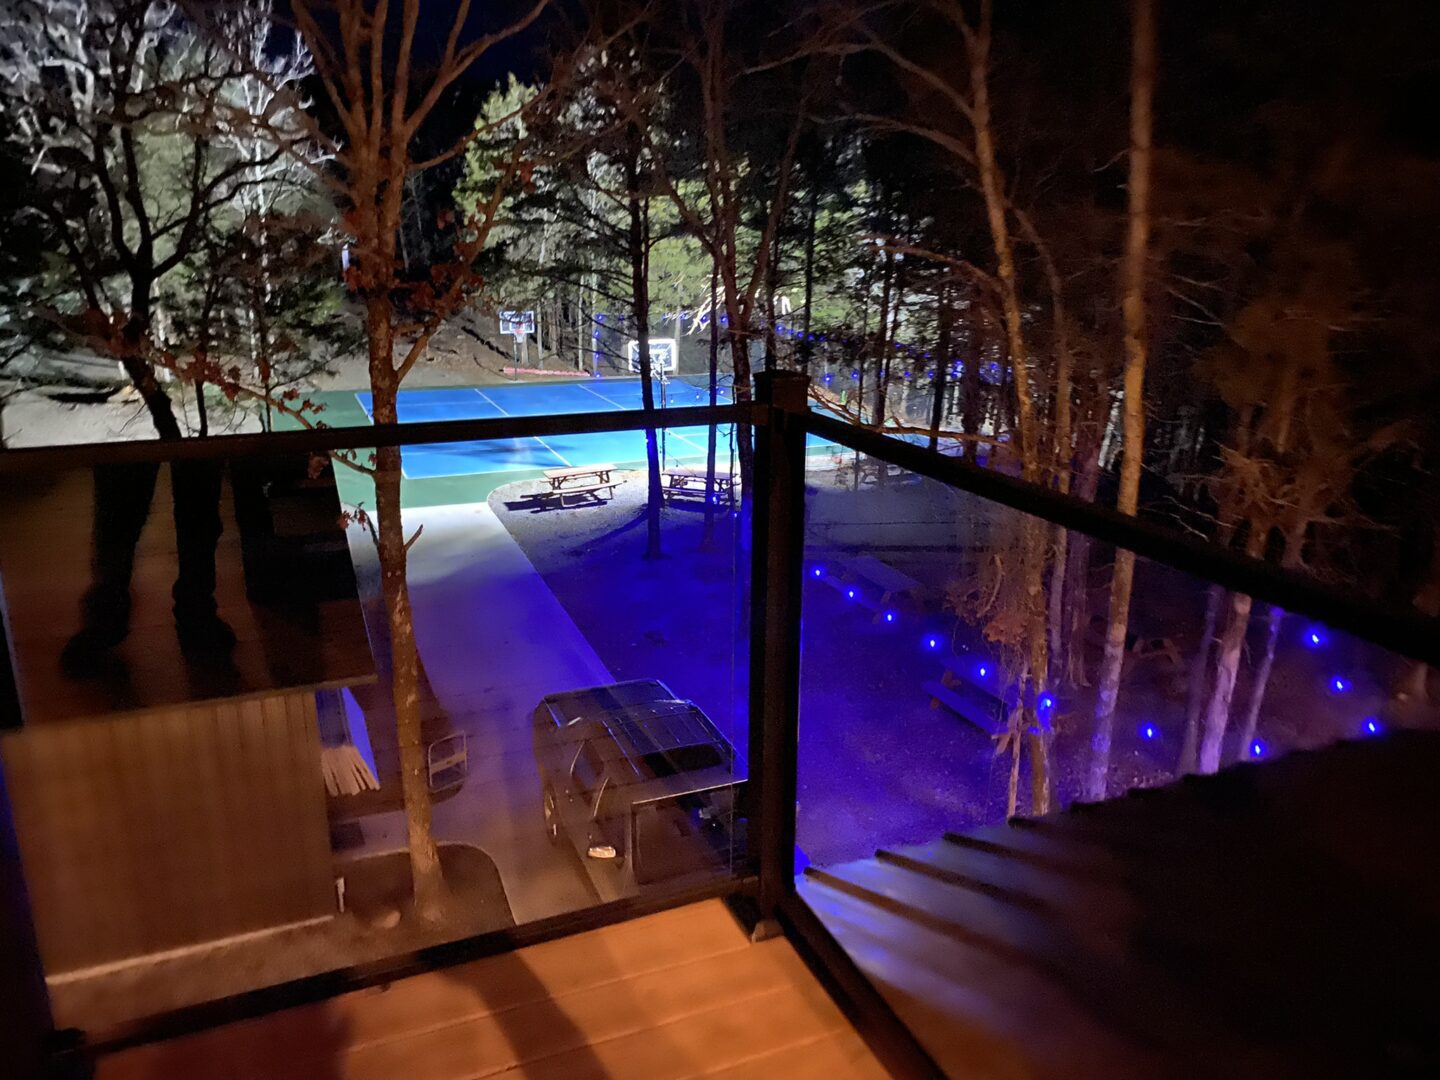 A view of the pool from above at night.